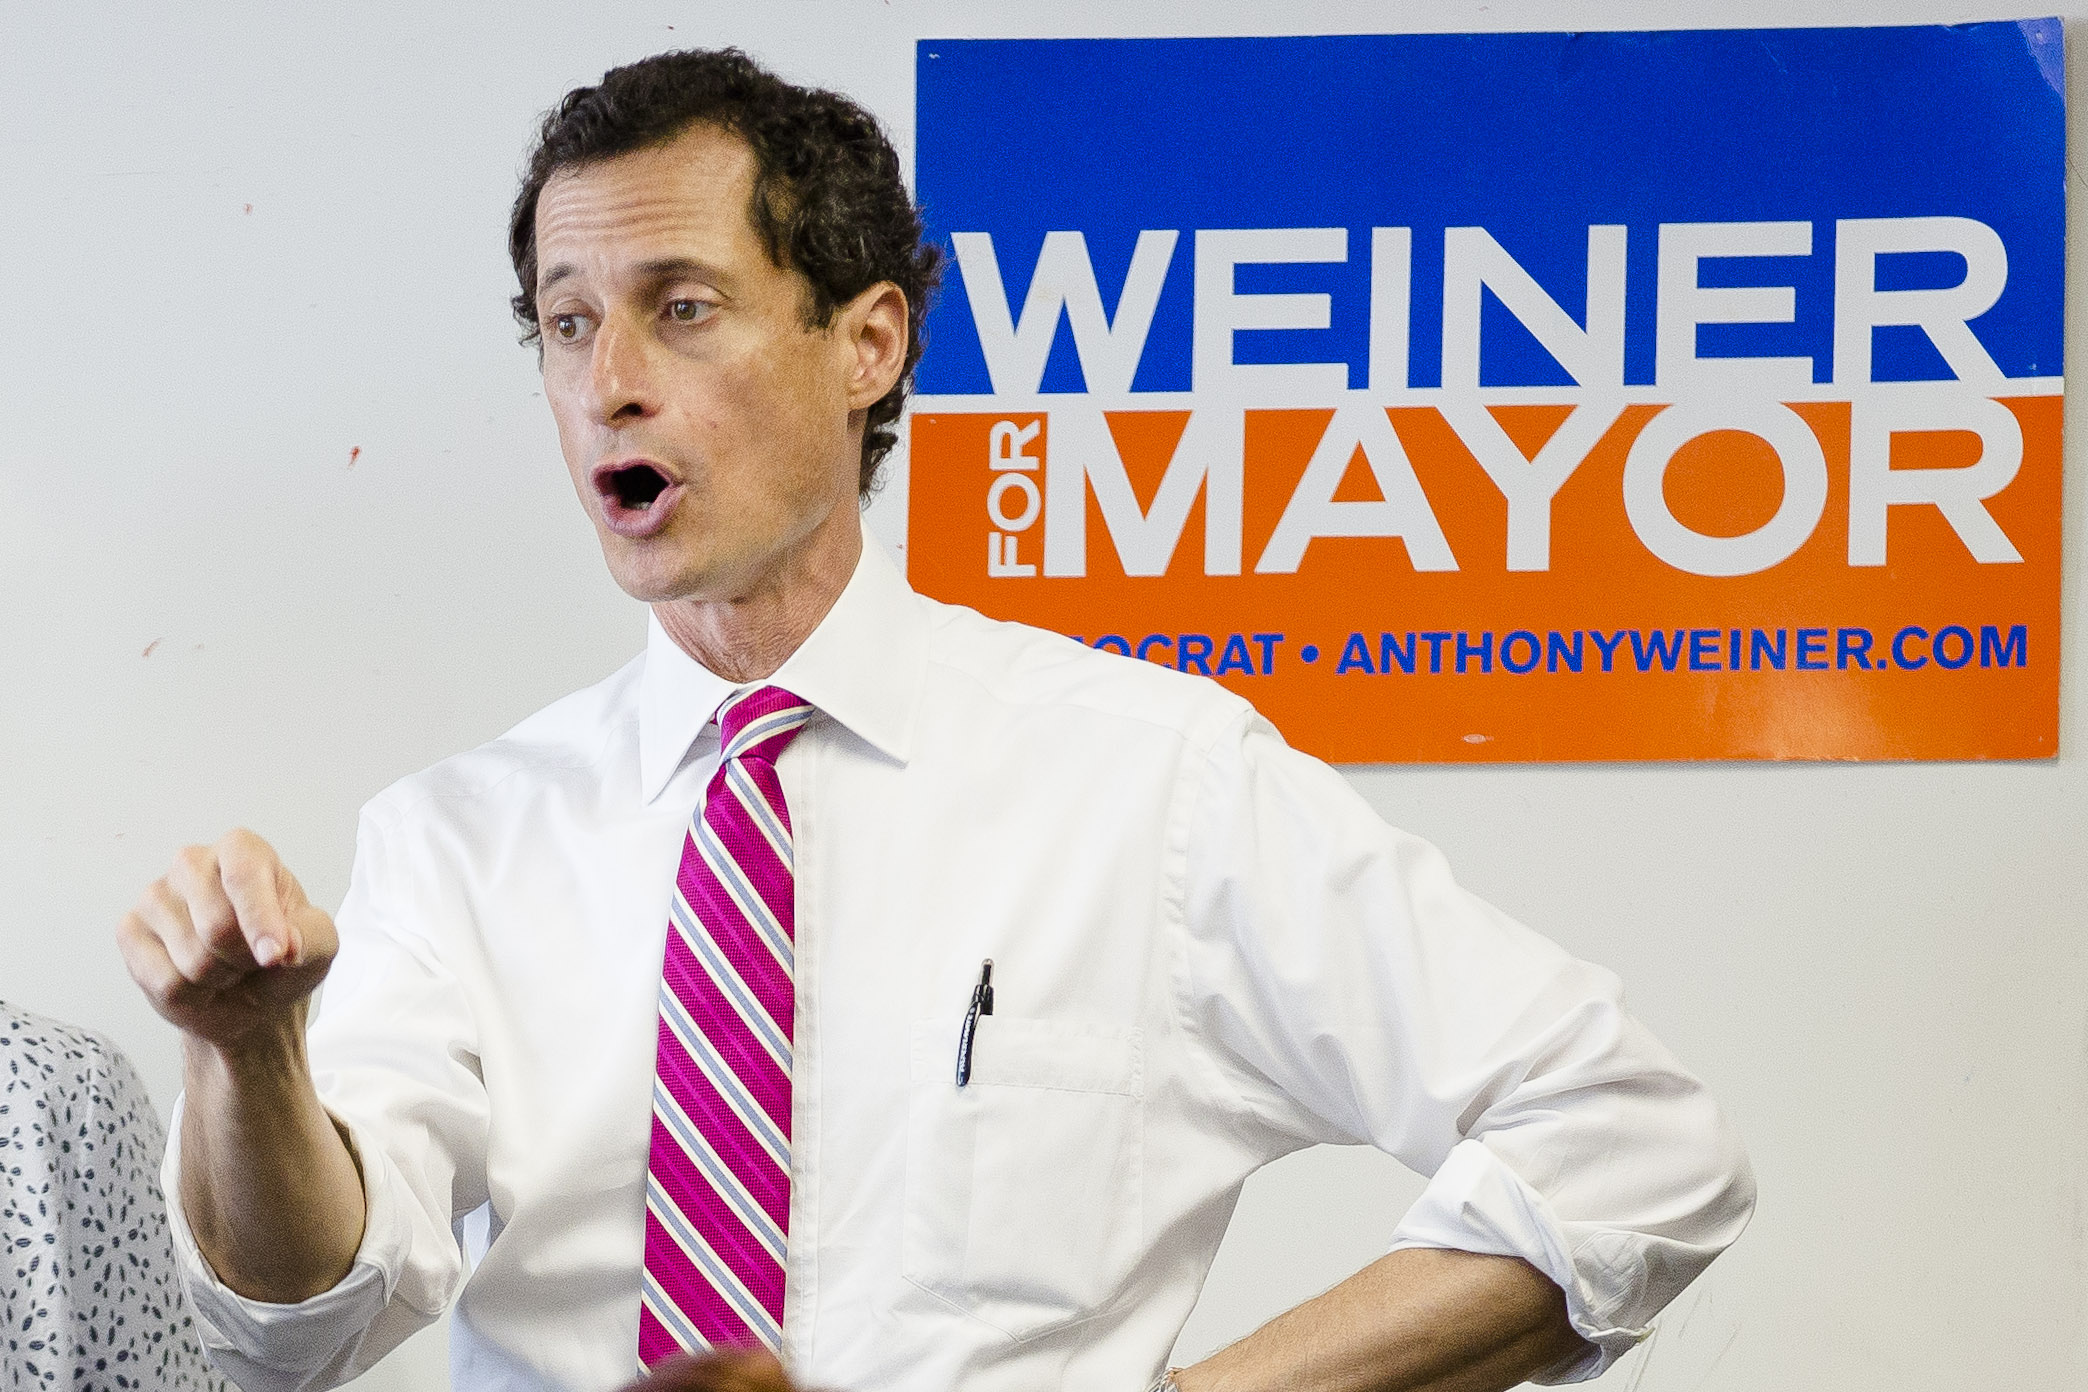 Anthony Weiner Defiant, Won't Drop Out Of Nyc Mayor Race